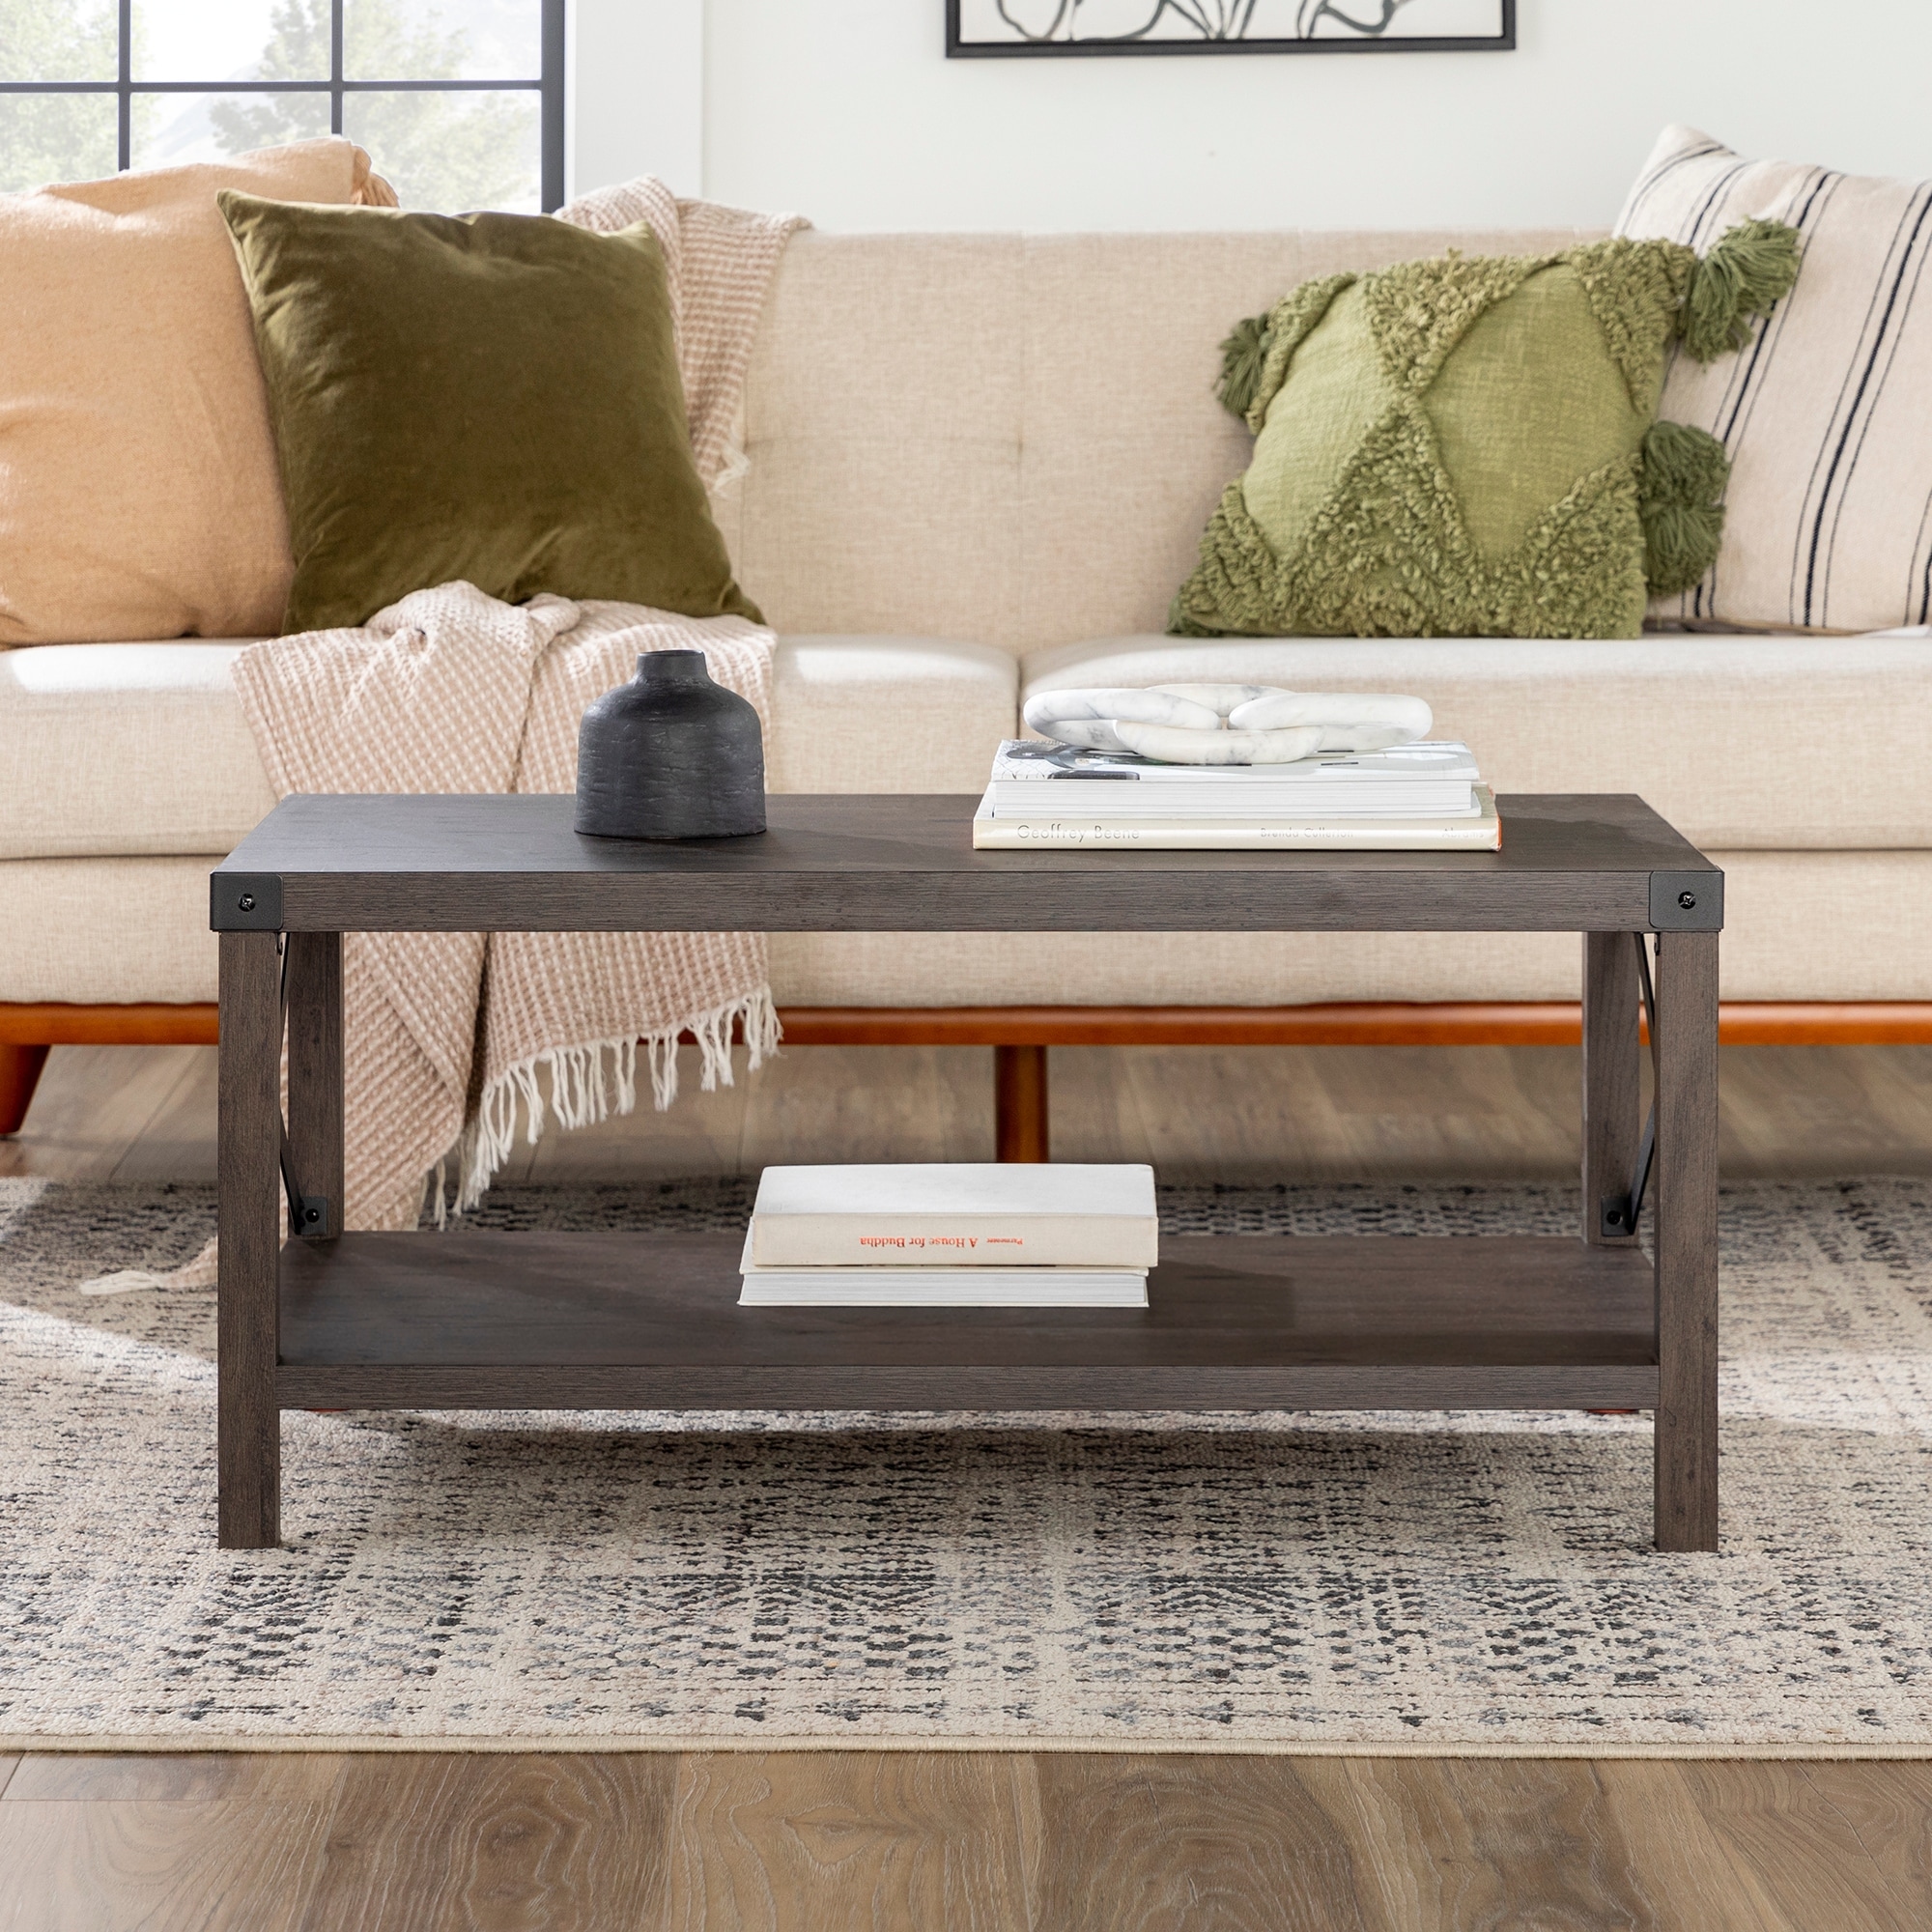 Middlebrook Designs Middlebrook Kujawa Metal Coffee Table with X-shaped Metal Accents